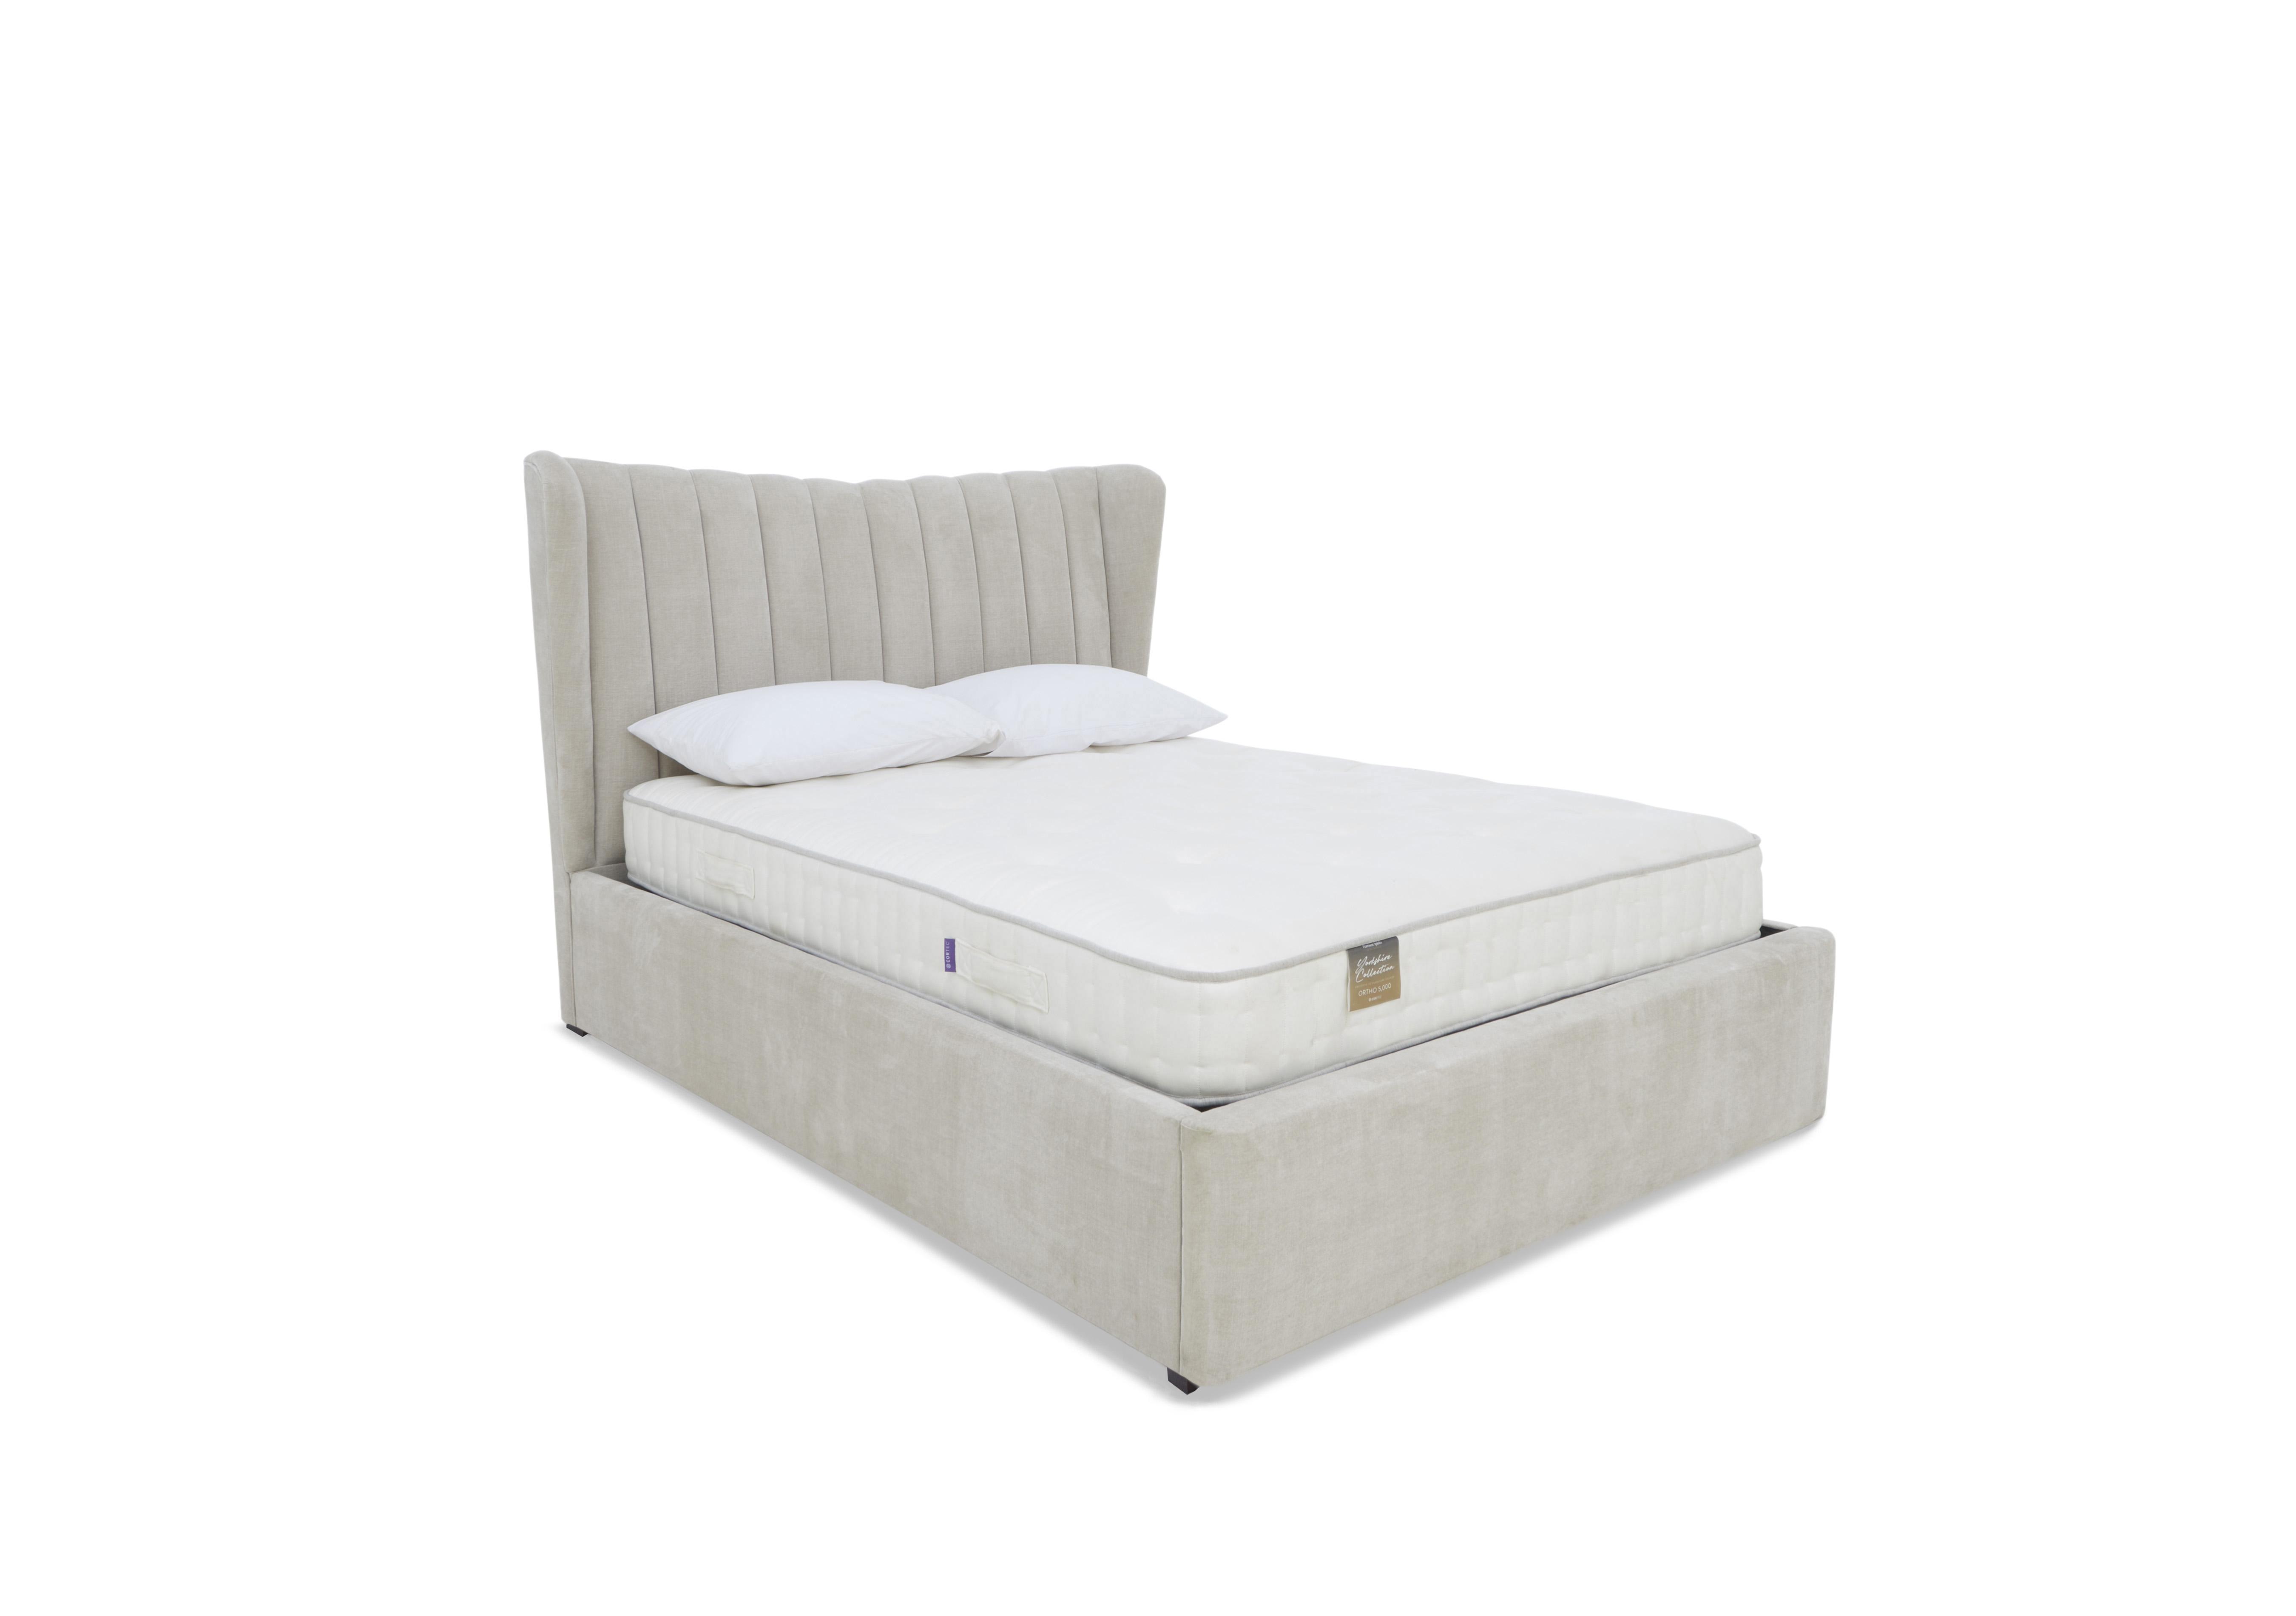 Bourne Electric Ottoman Bed Frame in Aston Linen on Furniture Village